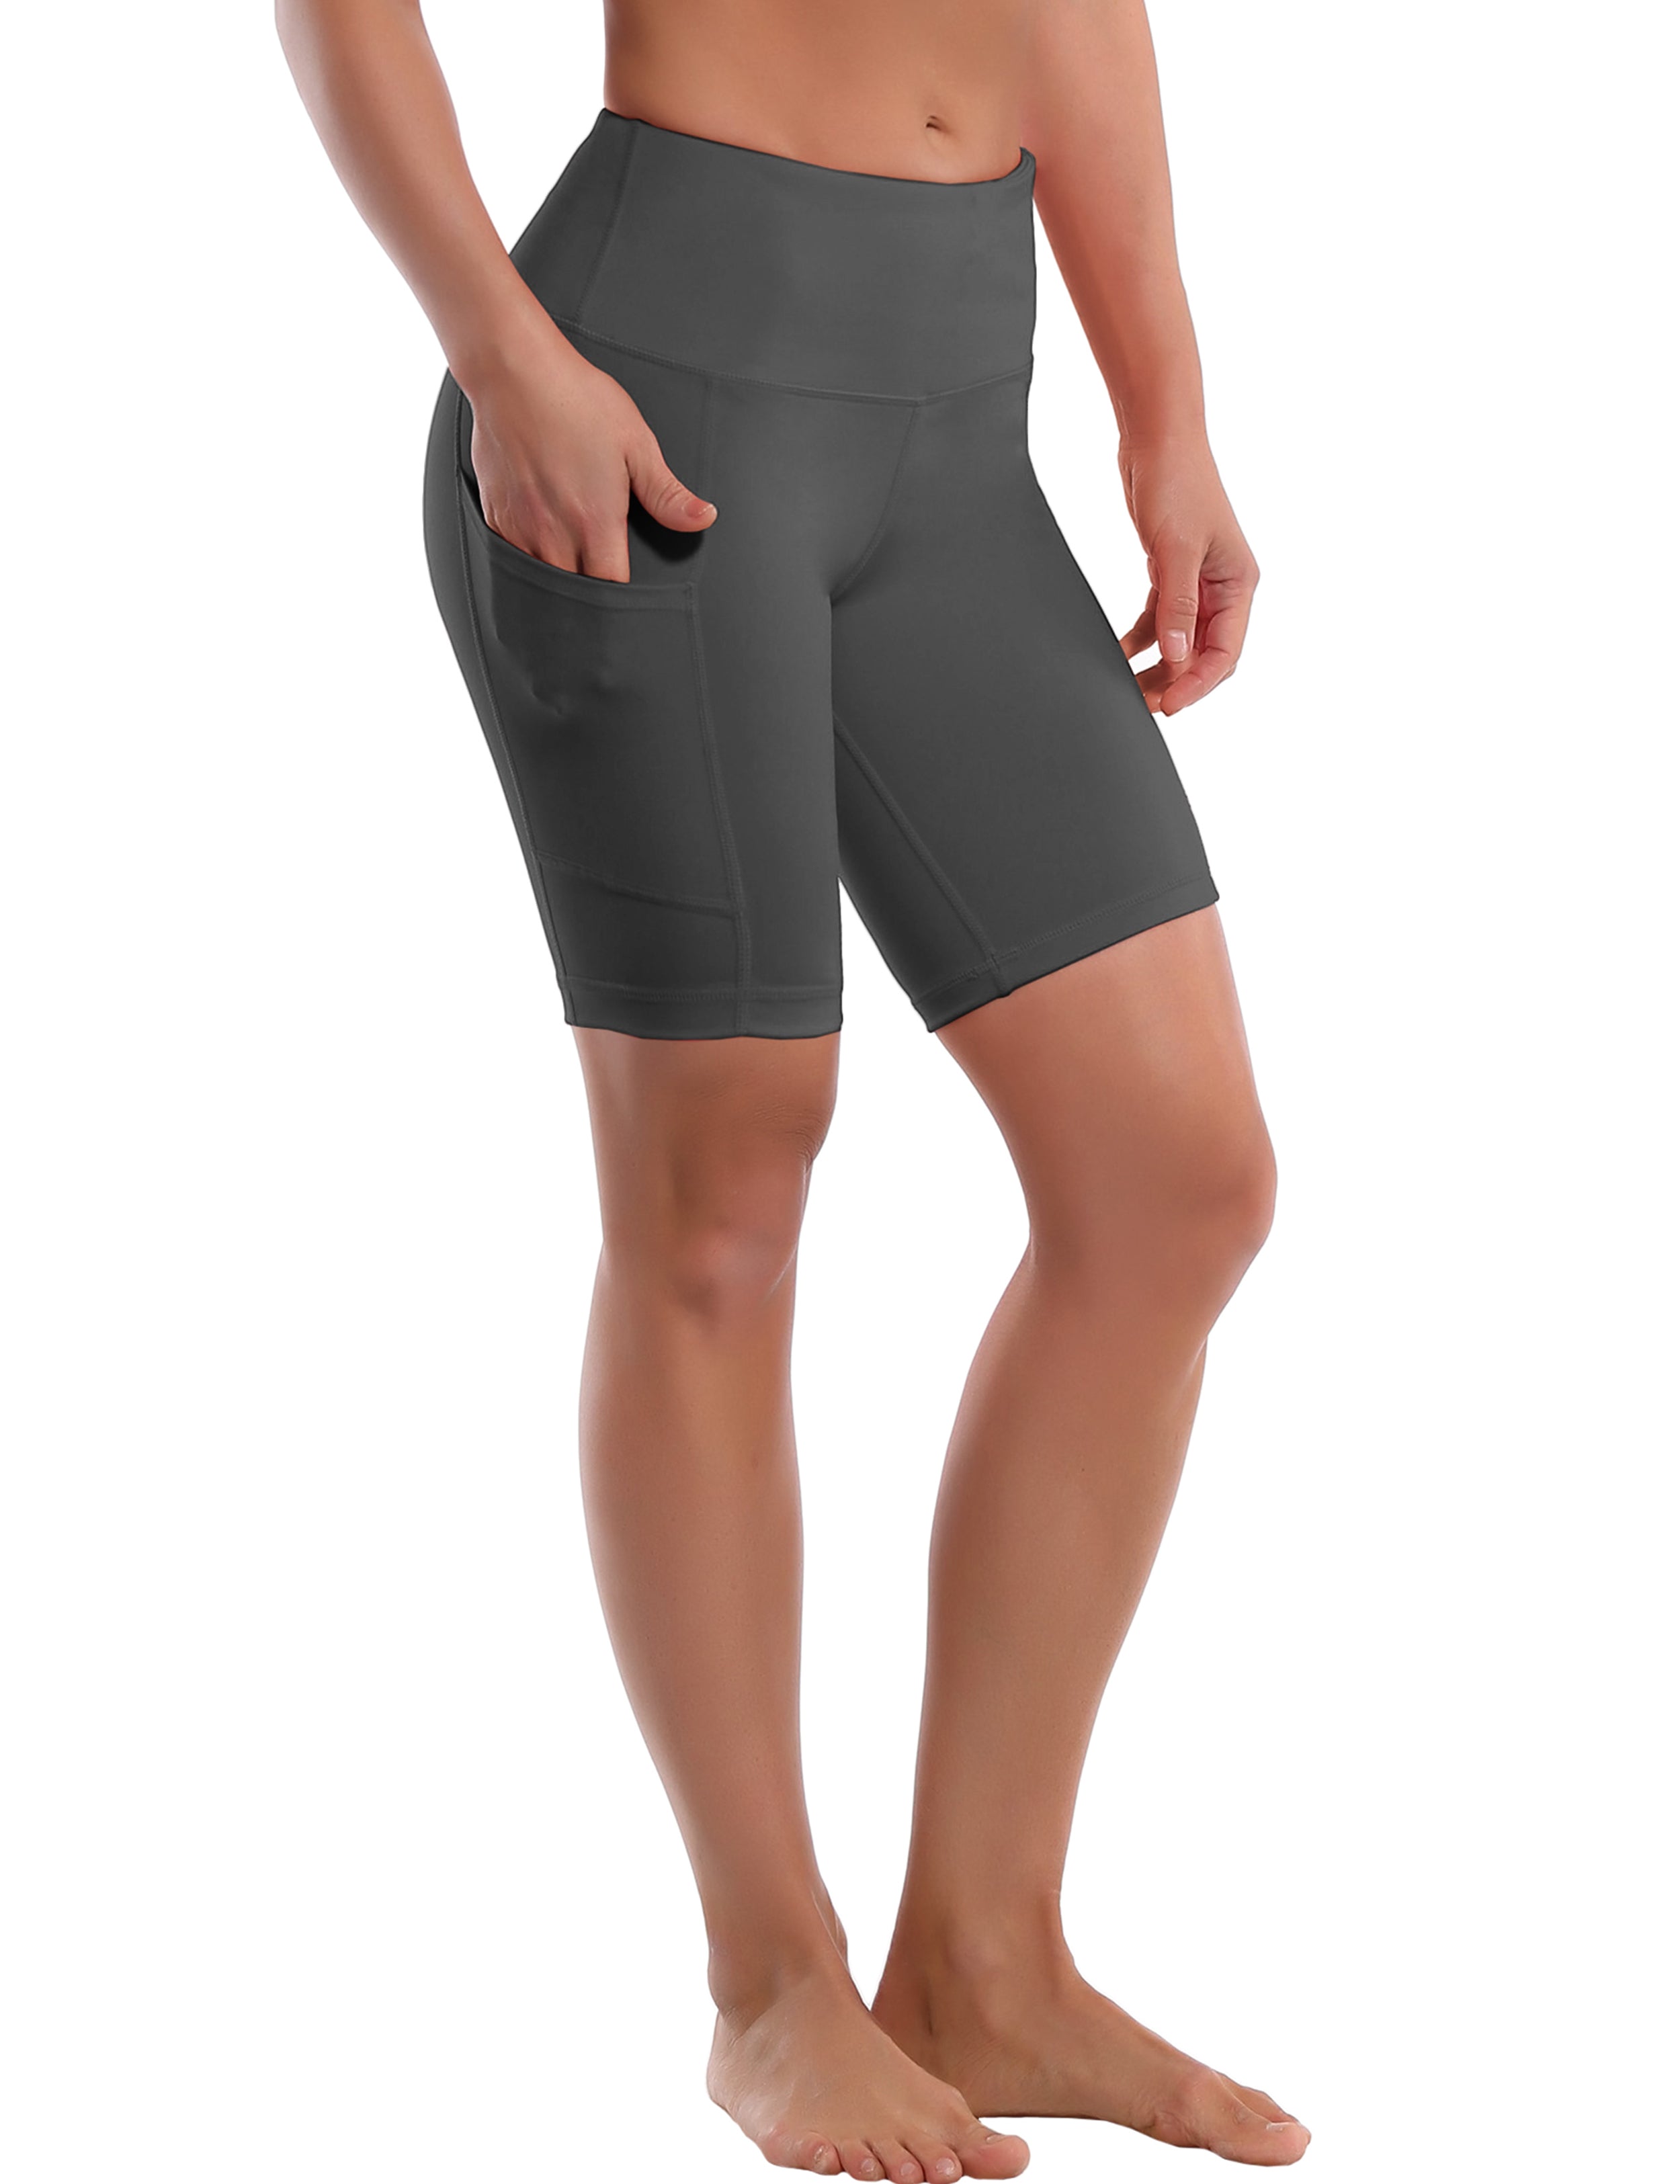 8" Side Pockets yogastudio Shorts shadowcharcoal Sleek, soft, smooth and totally comfortable: our newest style is here. Softest-ever fabric High elasticity High density 4-way stretch Fabric doesn't attract lint easily No see-through Moisture-wicking Machine wash 75% Nylon, 25% Spandex